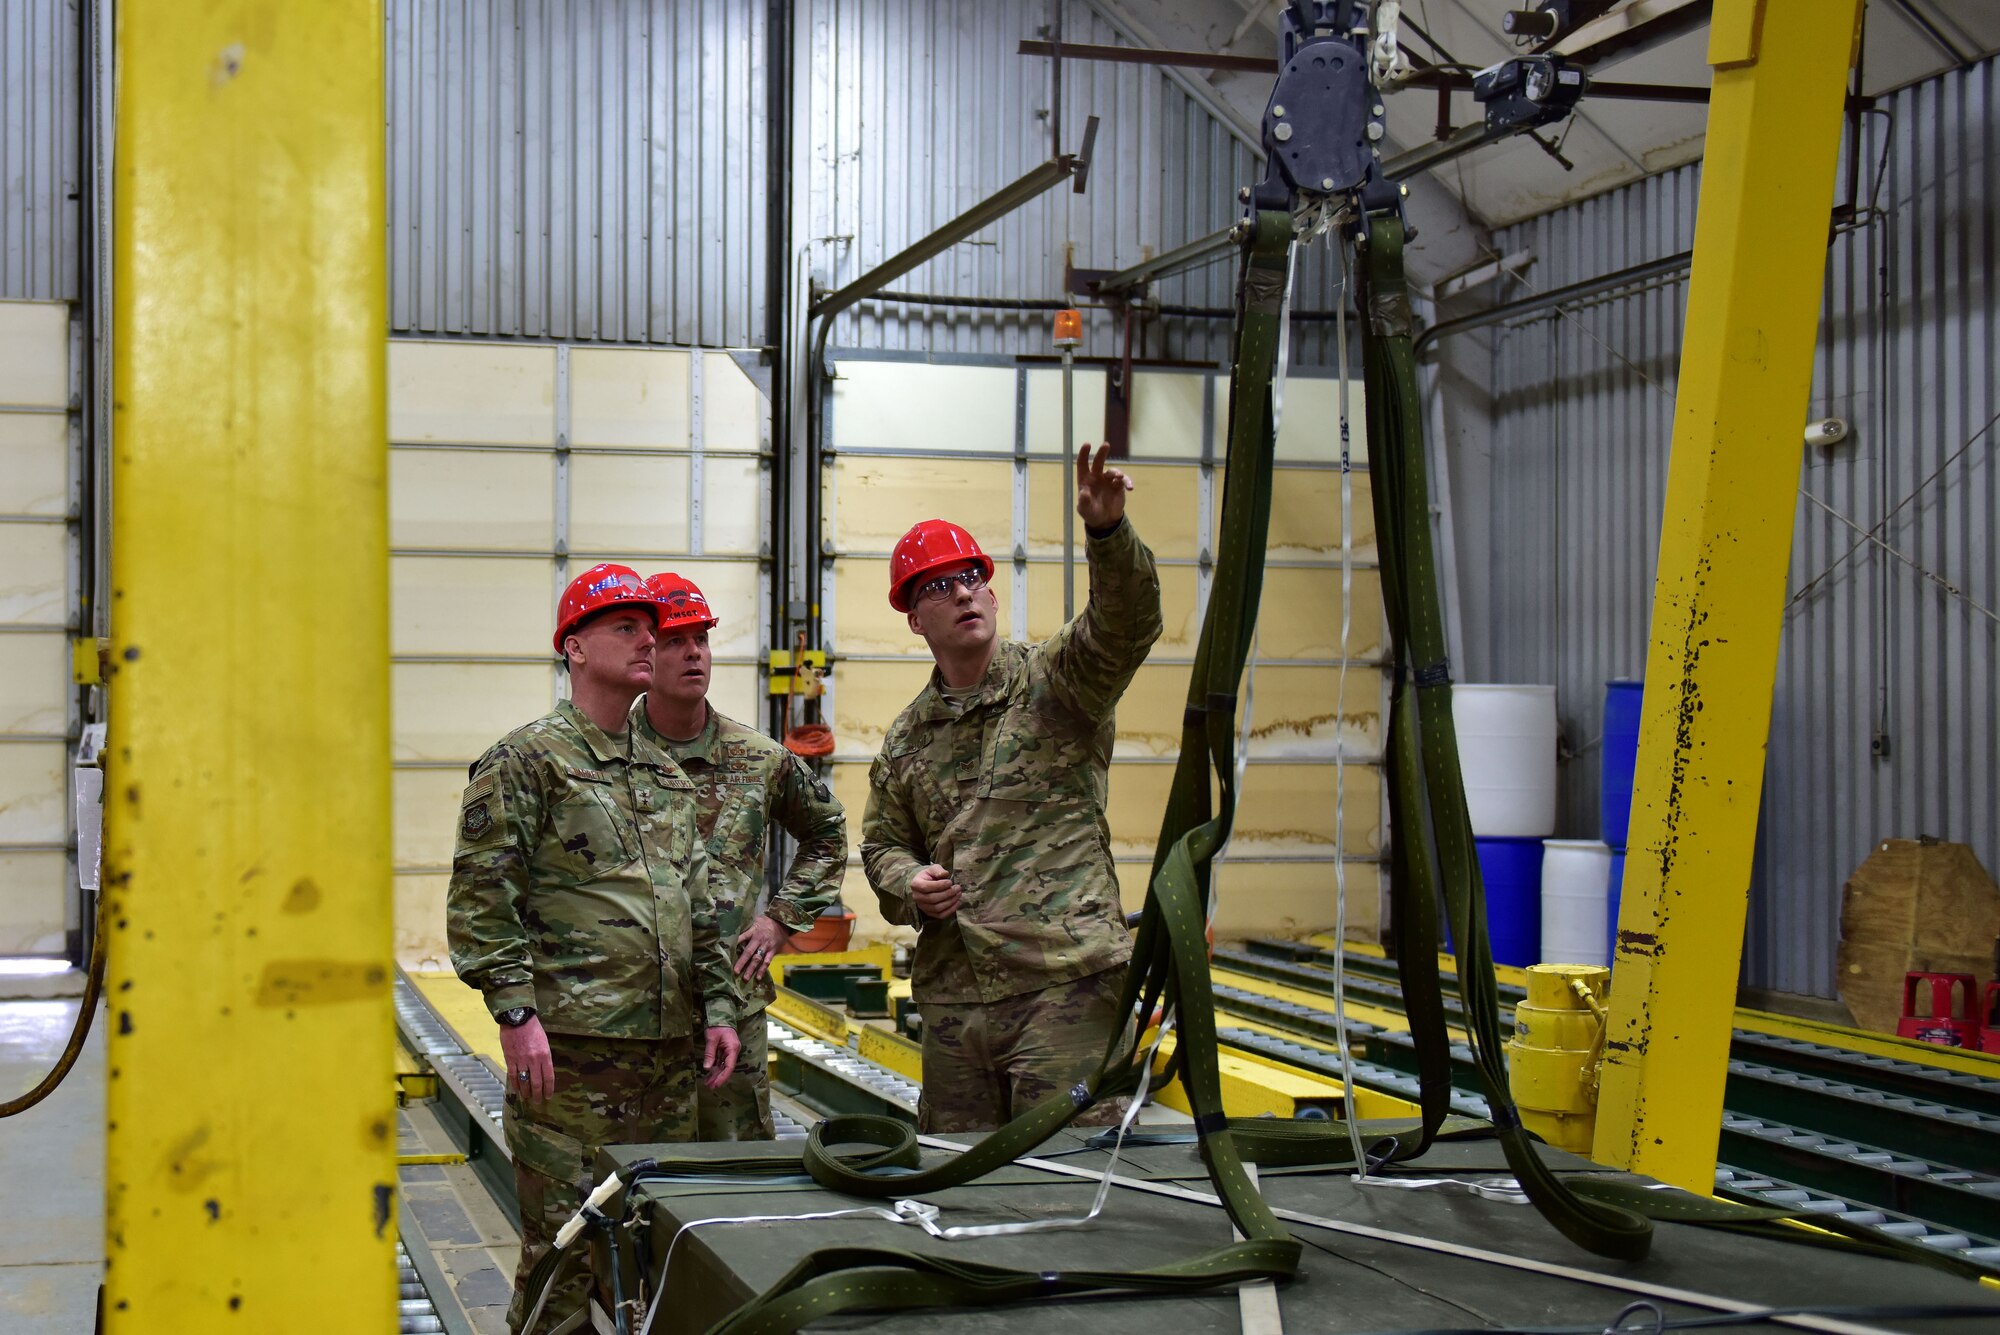 Men stand in front of a hoist and ropes.